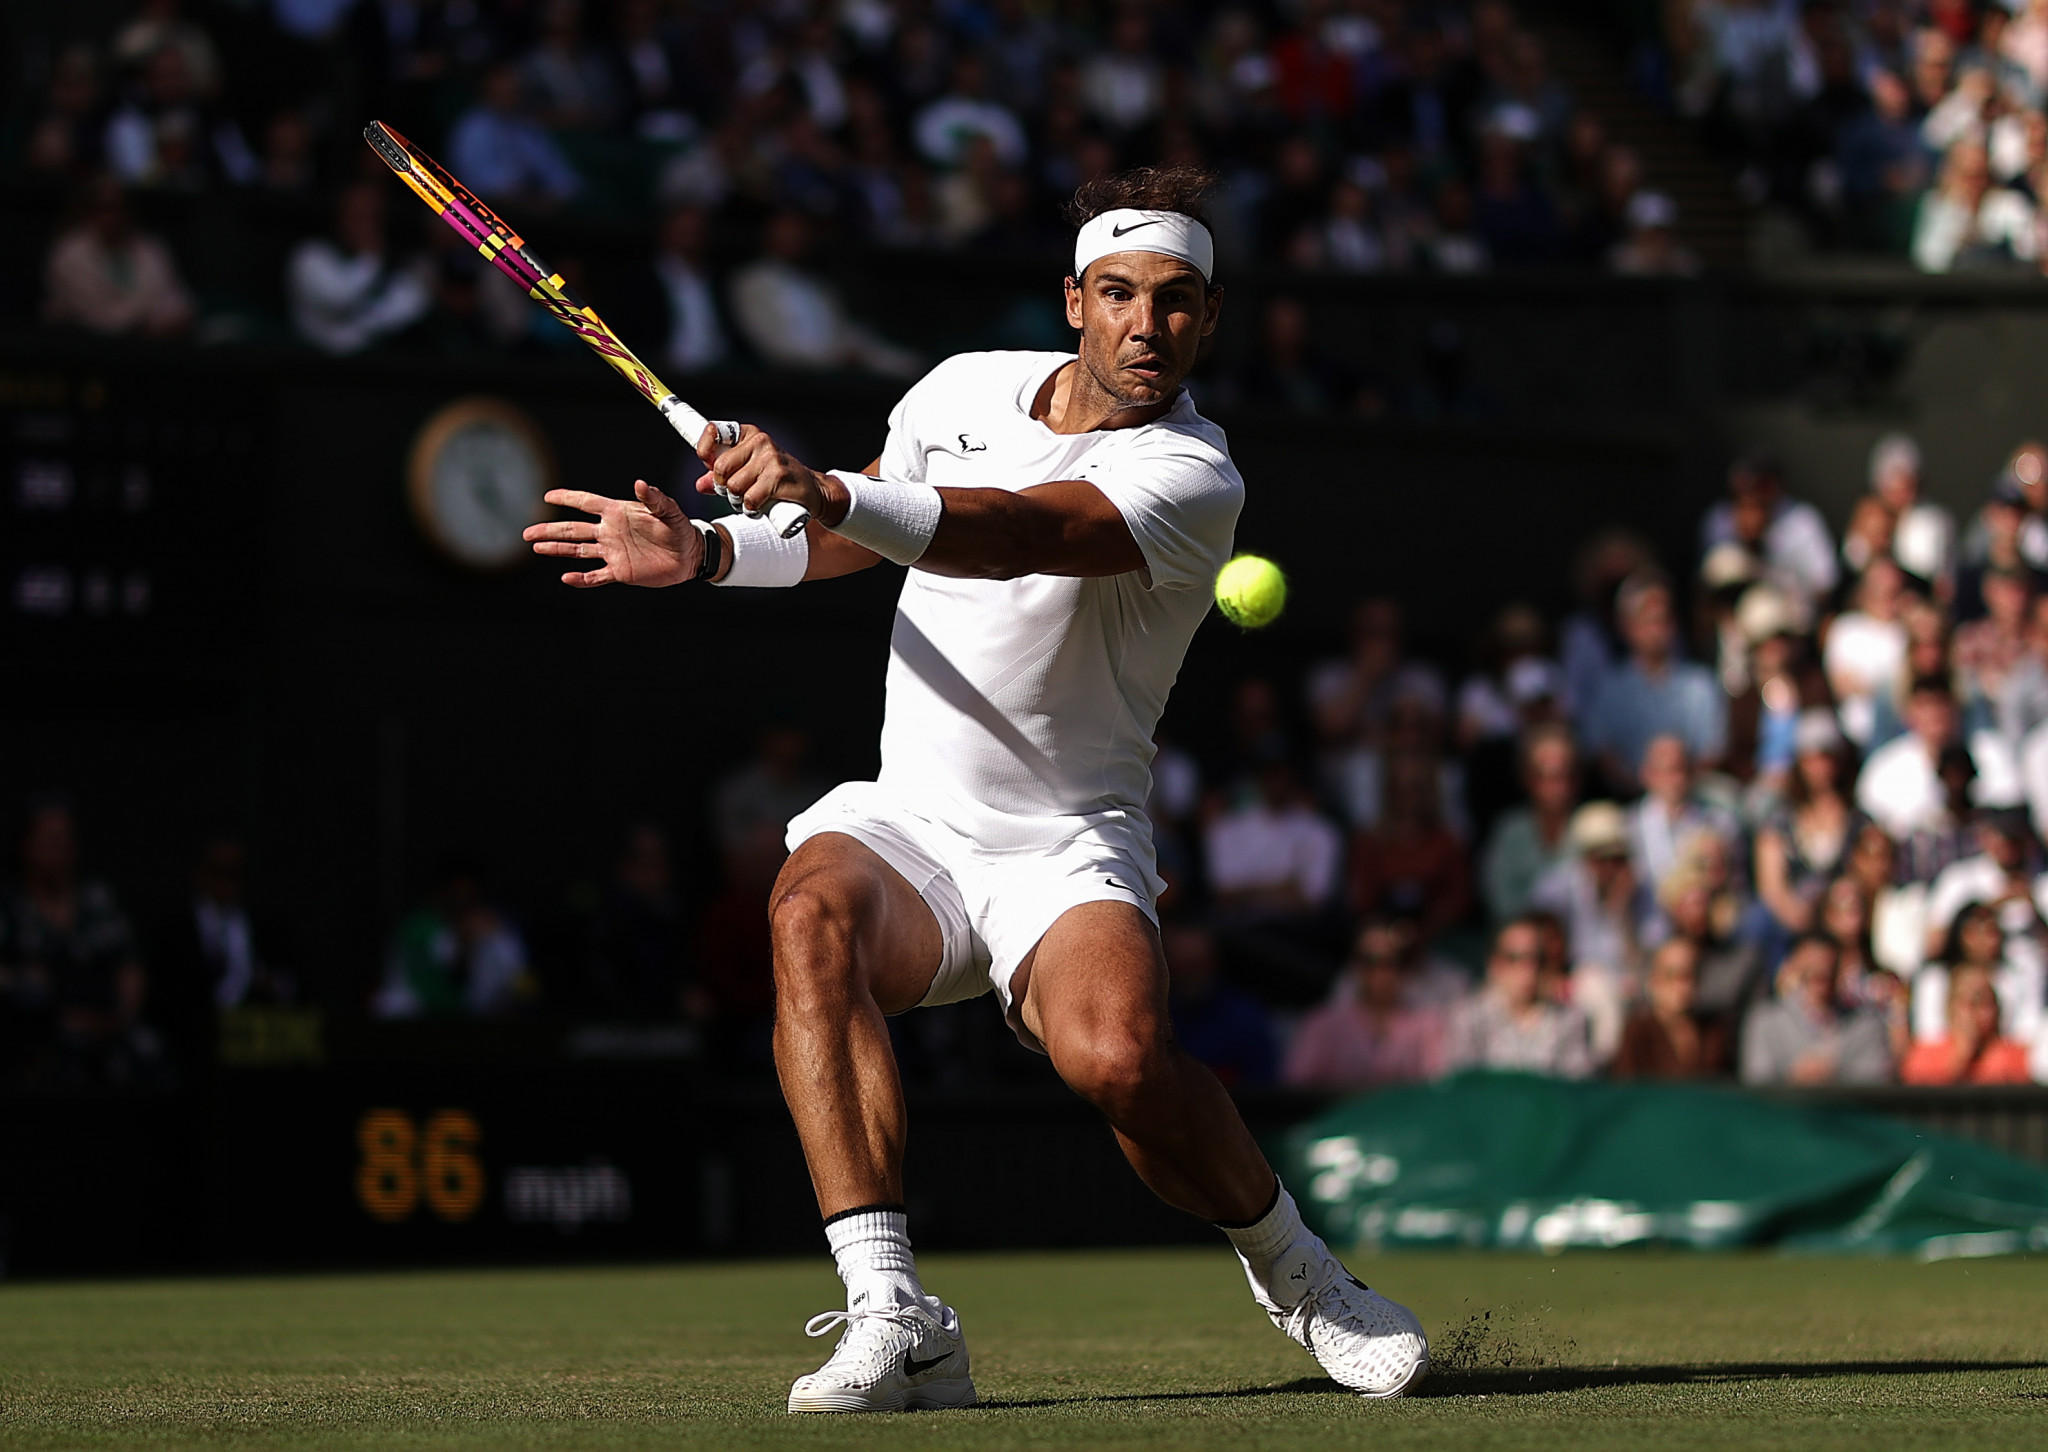 Spain's Rafael Nadal triumphed in four sets on day four at Wimbledon ©Getty Images